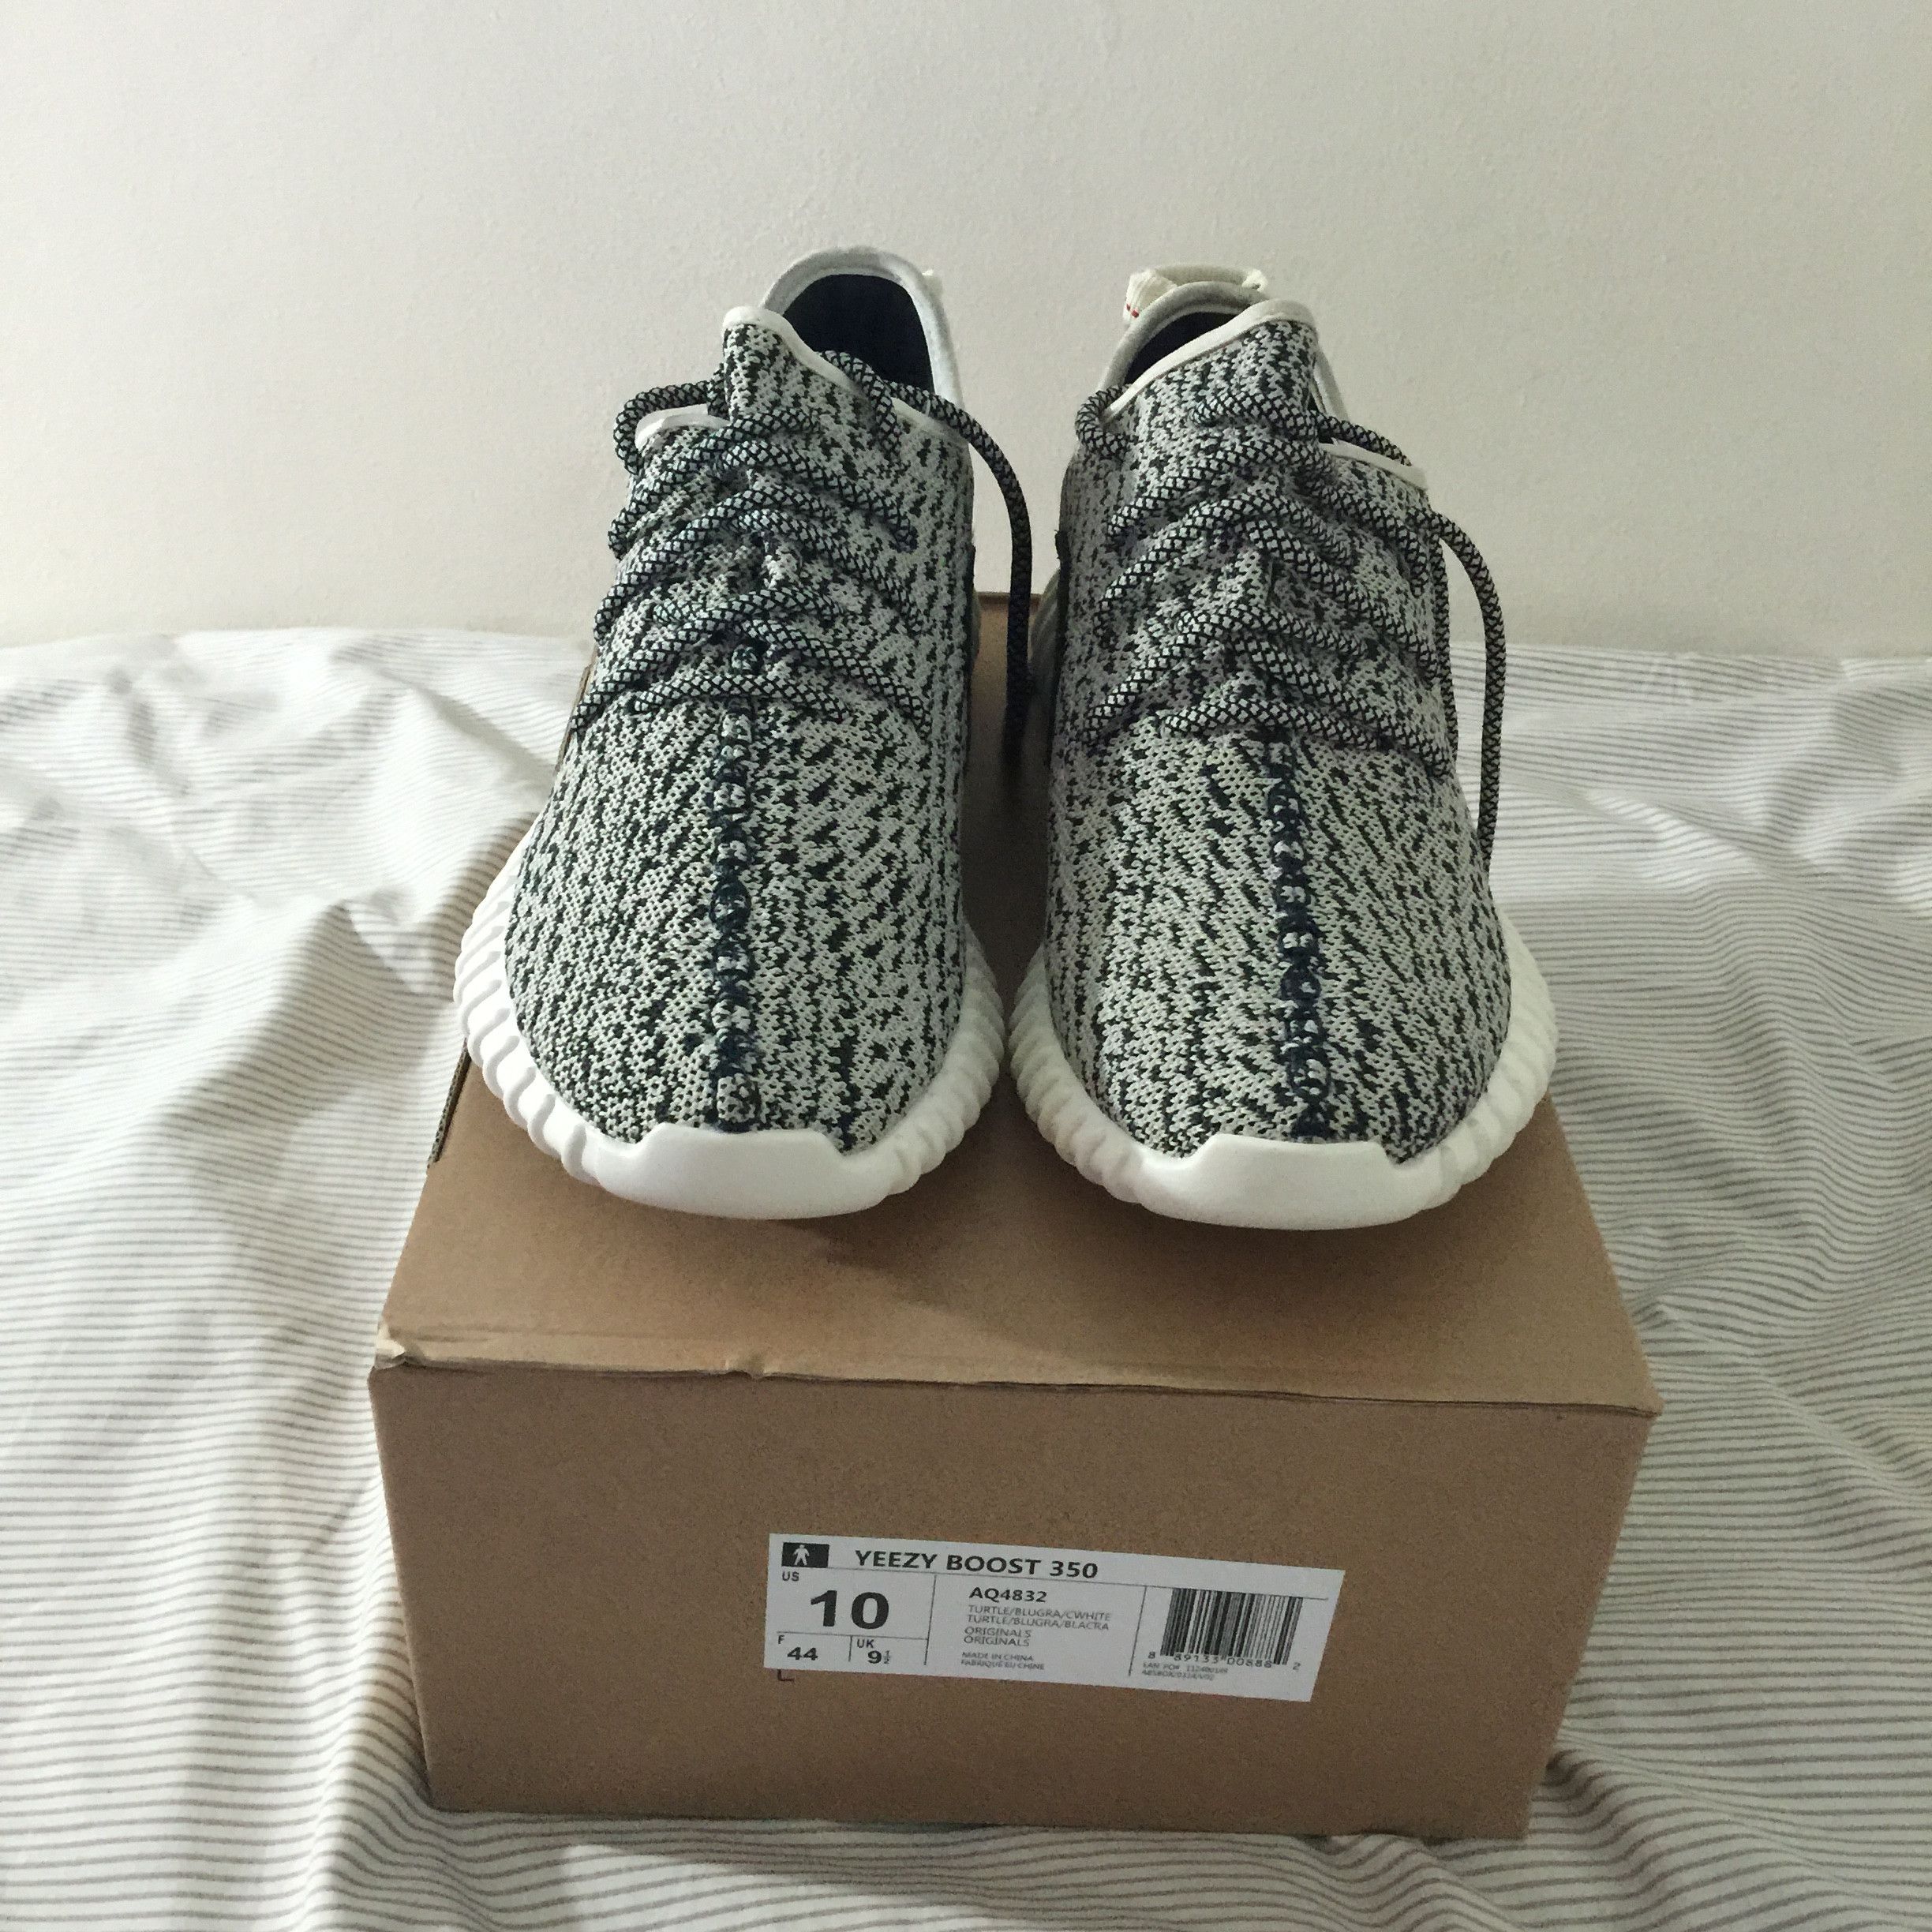 Adidas Yeezy 350 Boost Size US 10 / EU 43 - 2 Preview